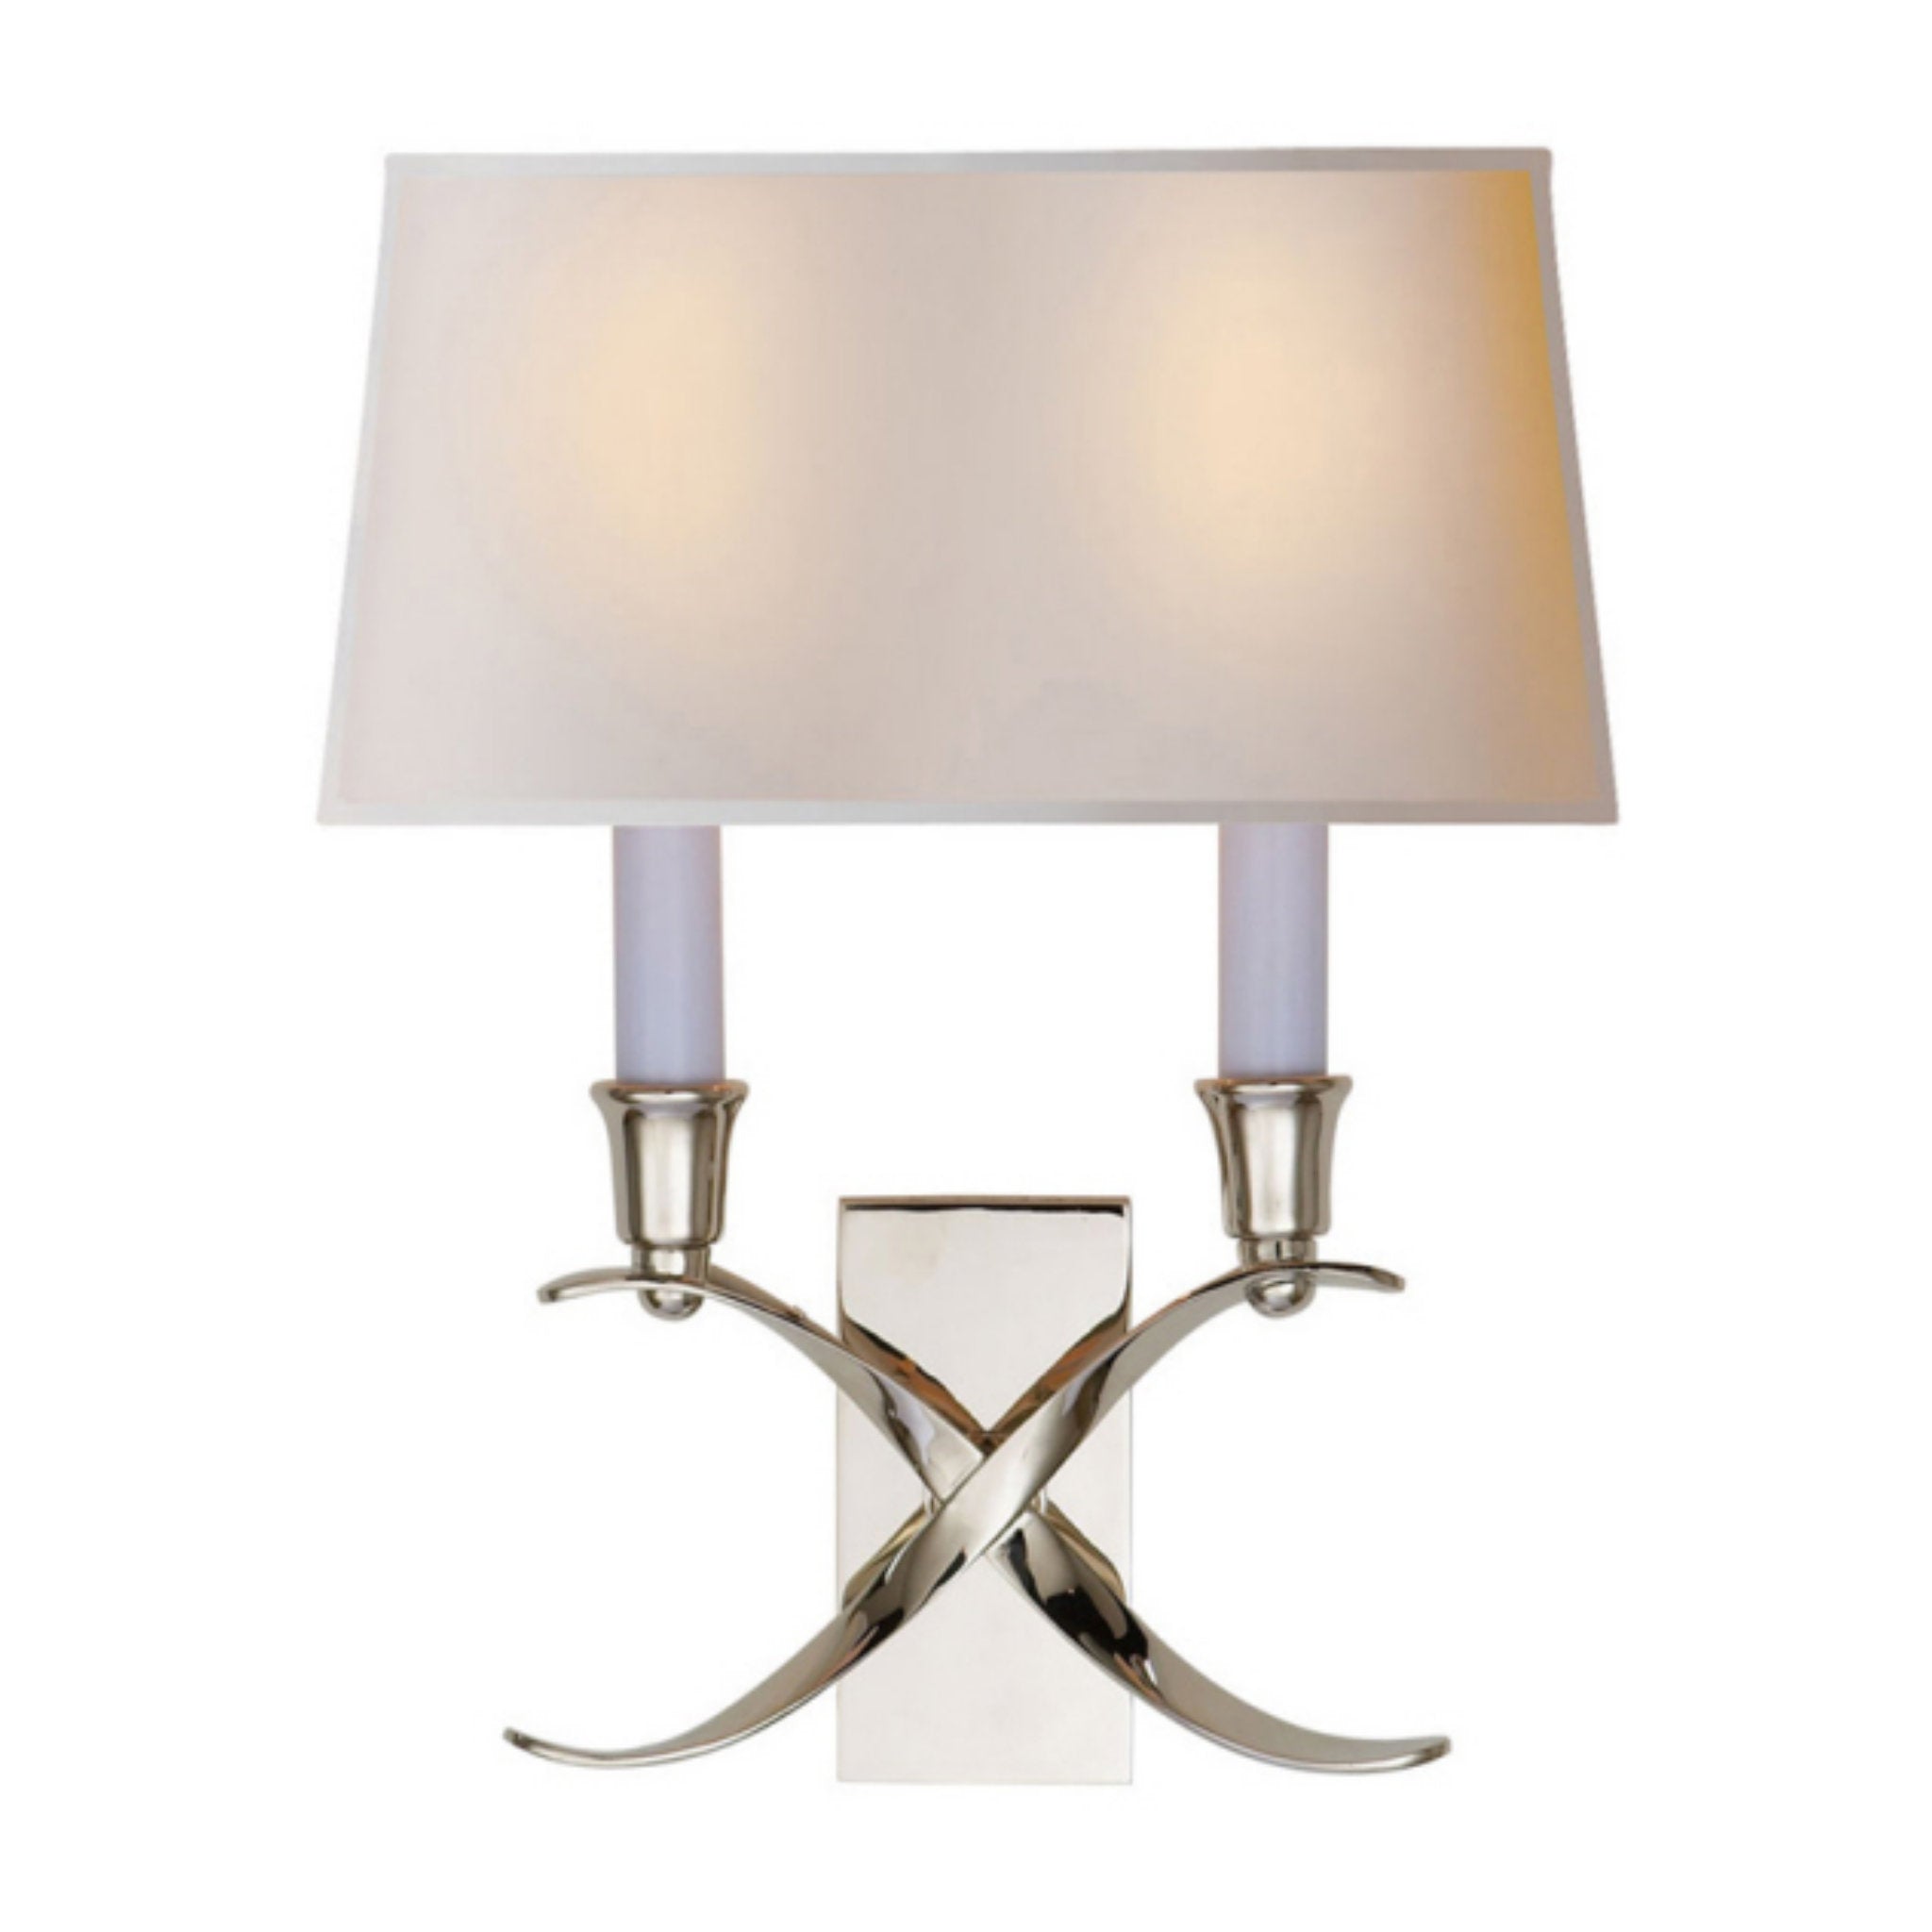 Chapman & Myers Cross Bouillotte Small Sconce in Polished Nickel with Natural Paper Shade